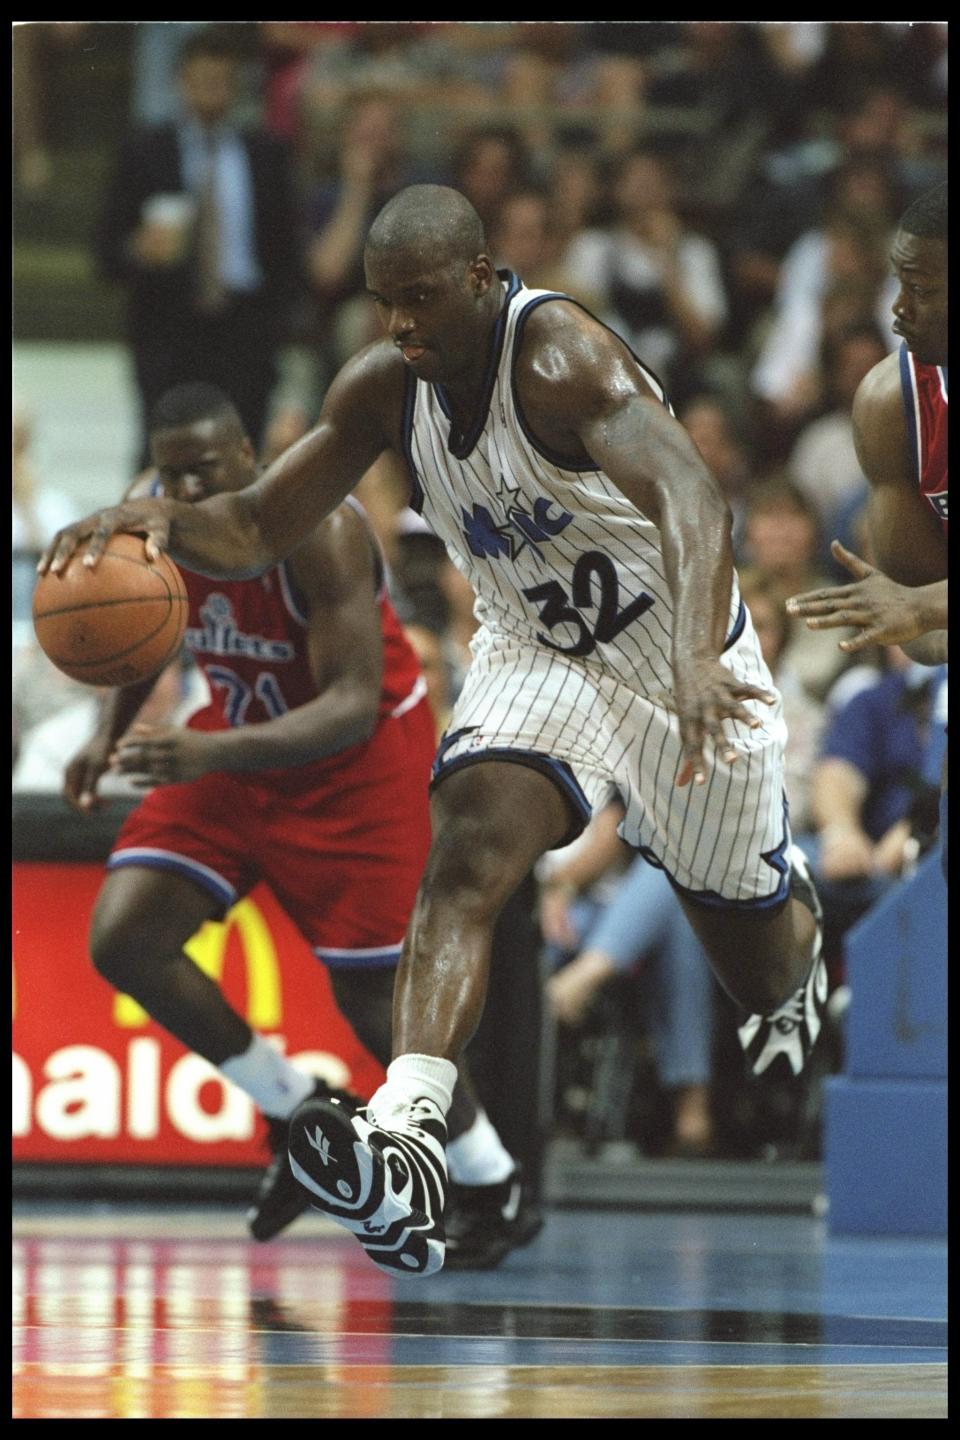 Shaquille O'Neal of the Orlando Magic moves the ball against the Washington Bullets during a game played at the Orlando Arena in Orlando, Florida on April 16, 1996. (Allsport)